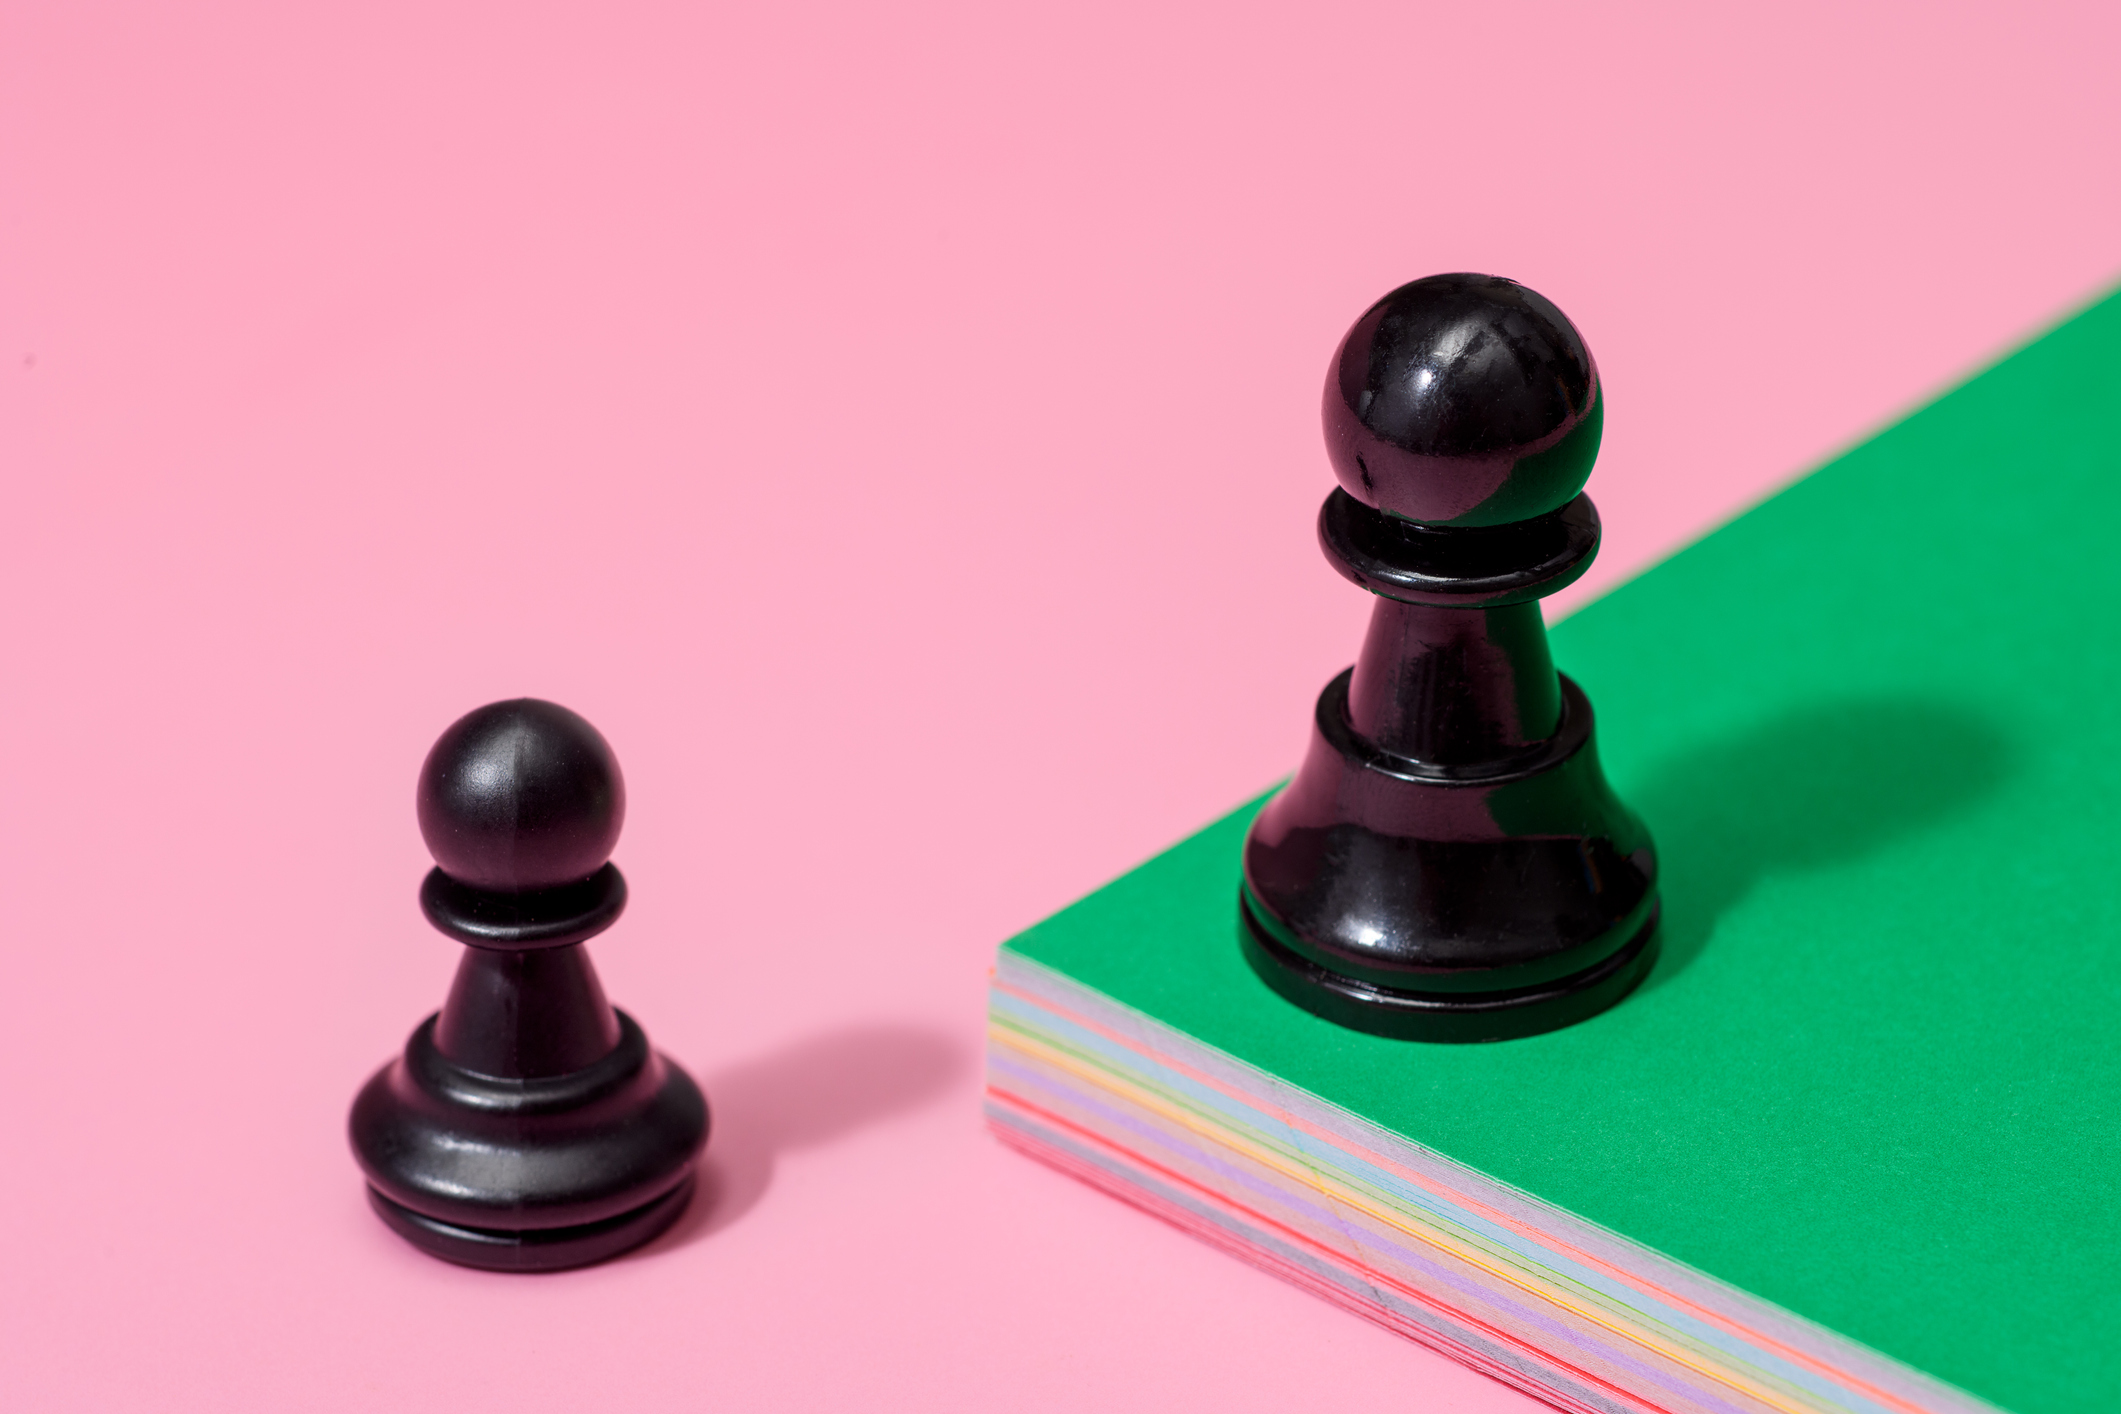 One chess pawn on a green raised platform, another on a low pink platform.  Startups and market decline